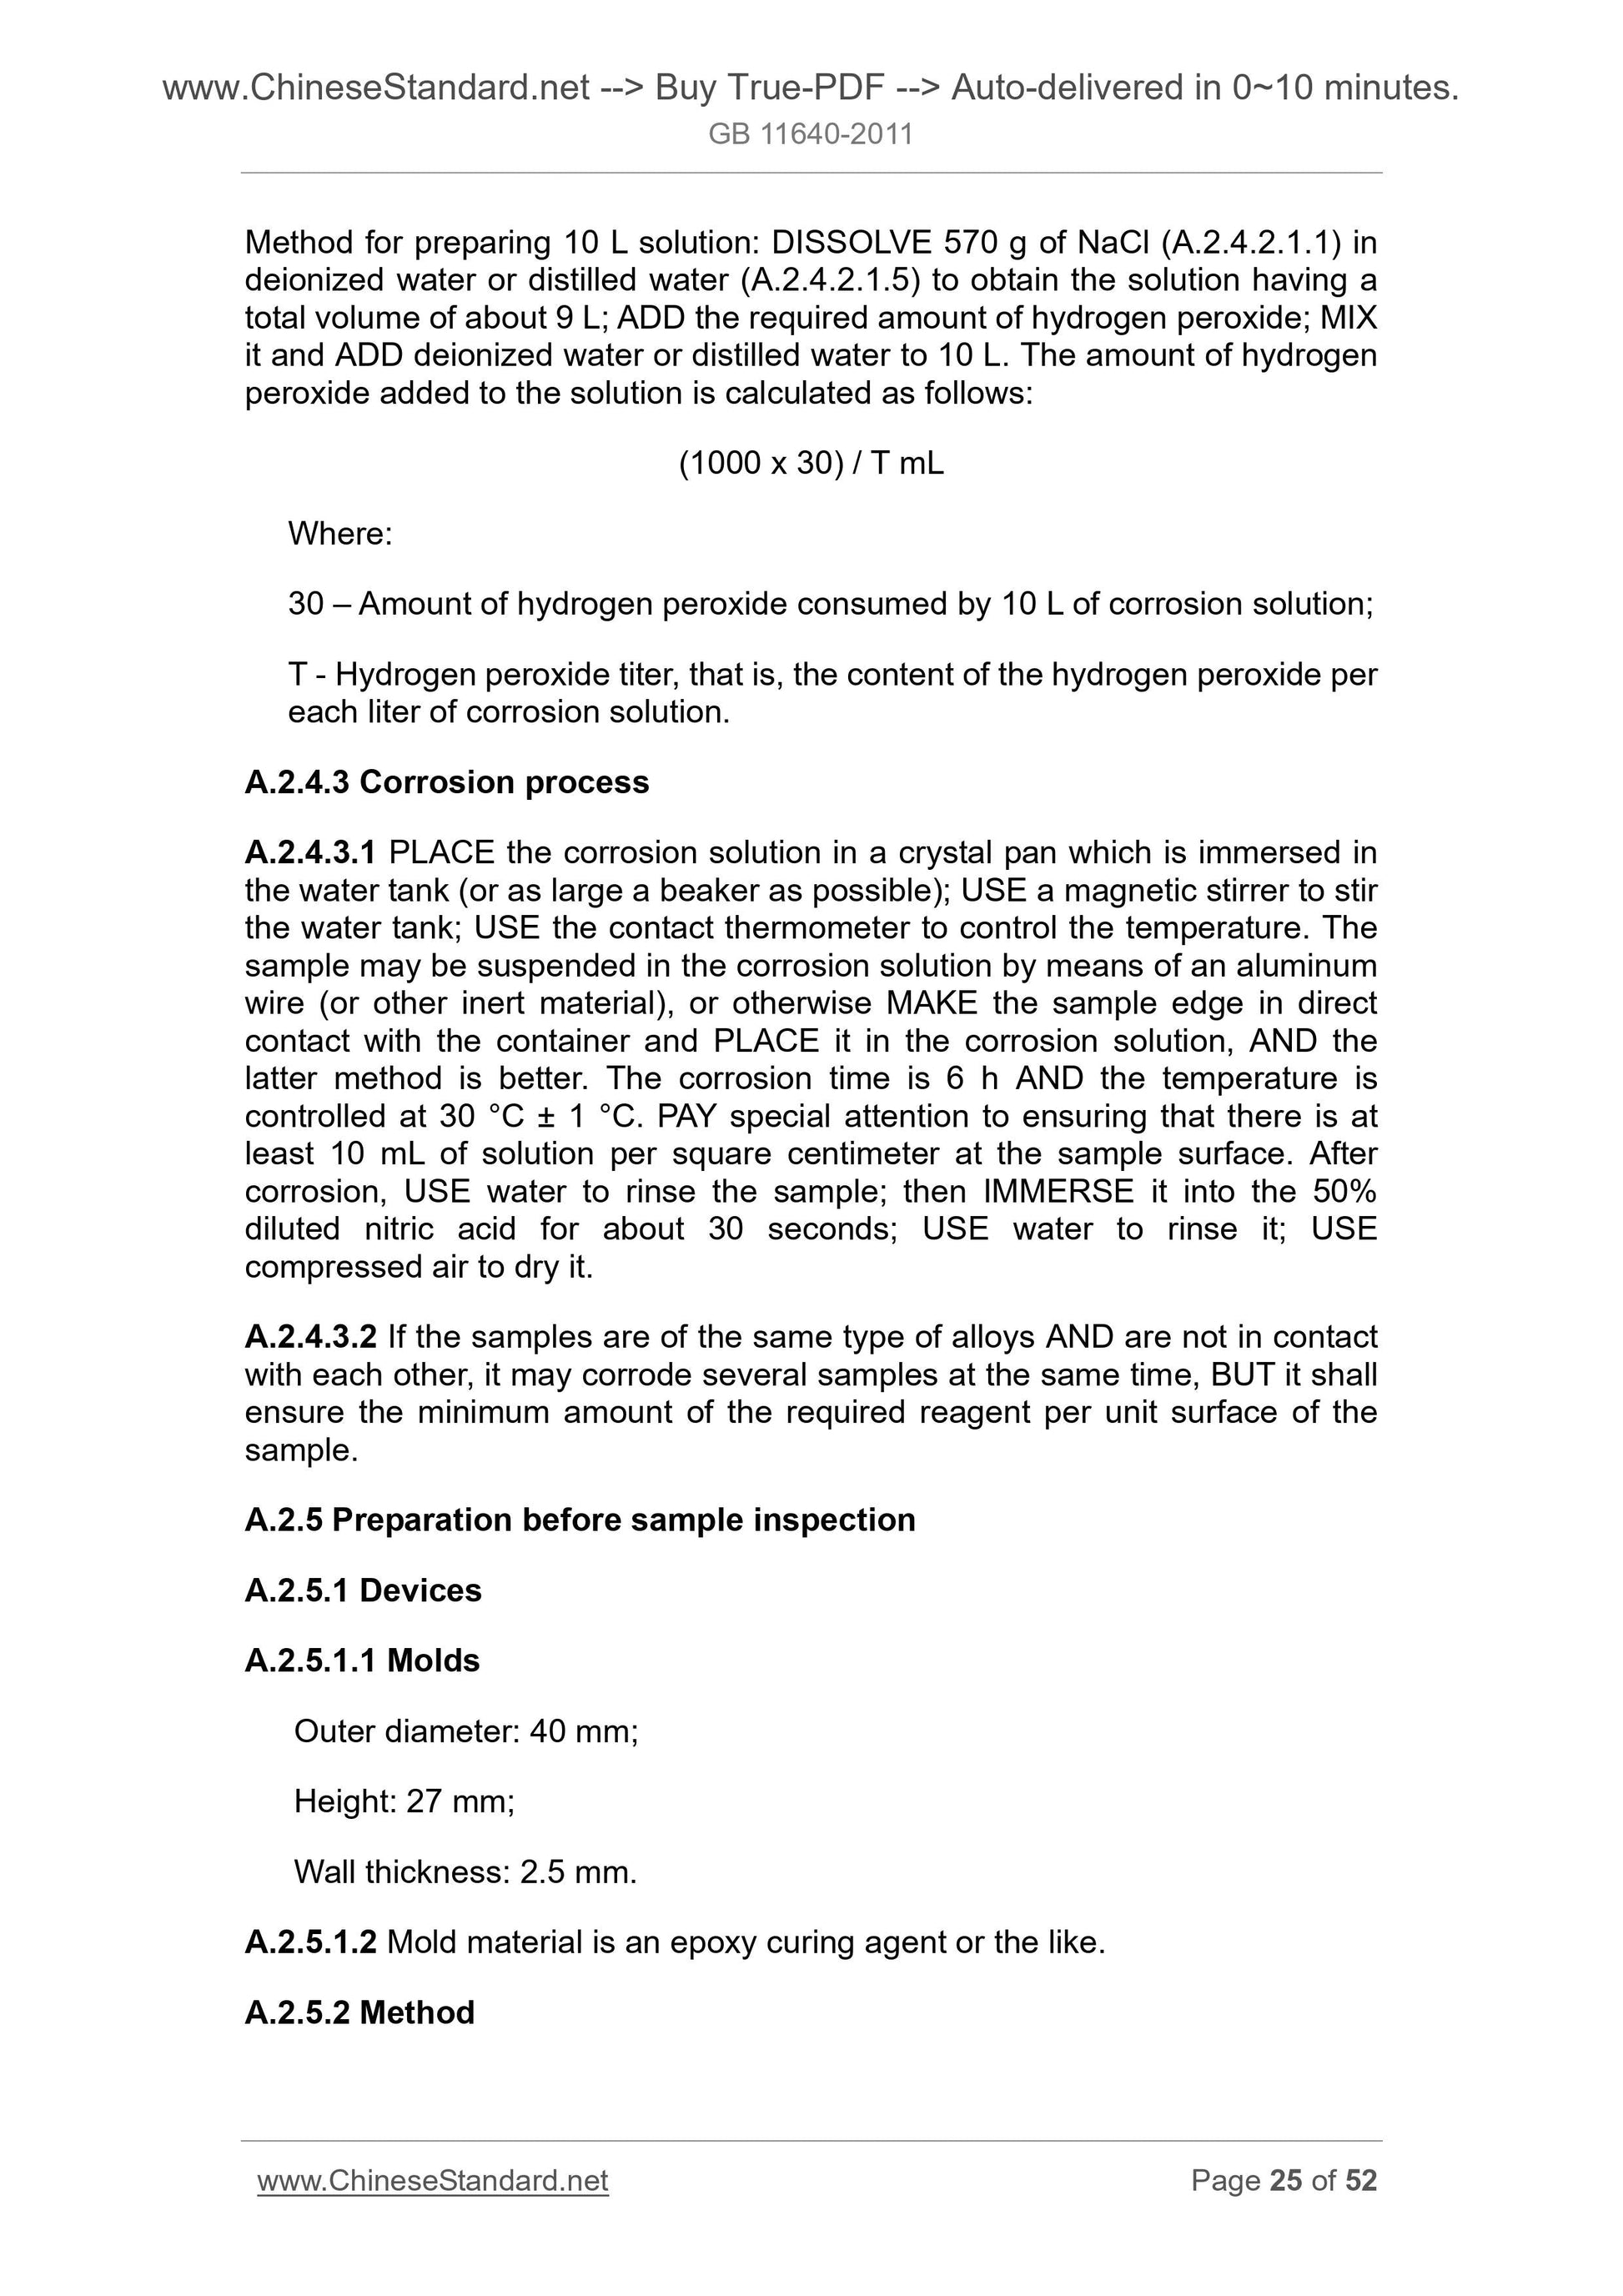 GB 11640-2011 Page 11